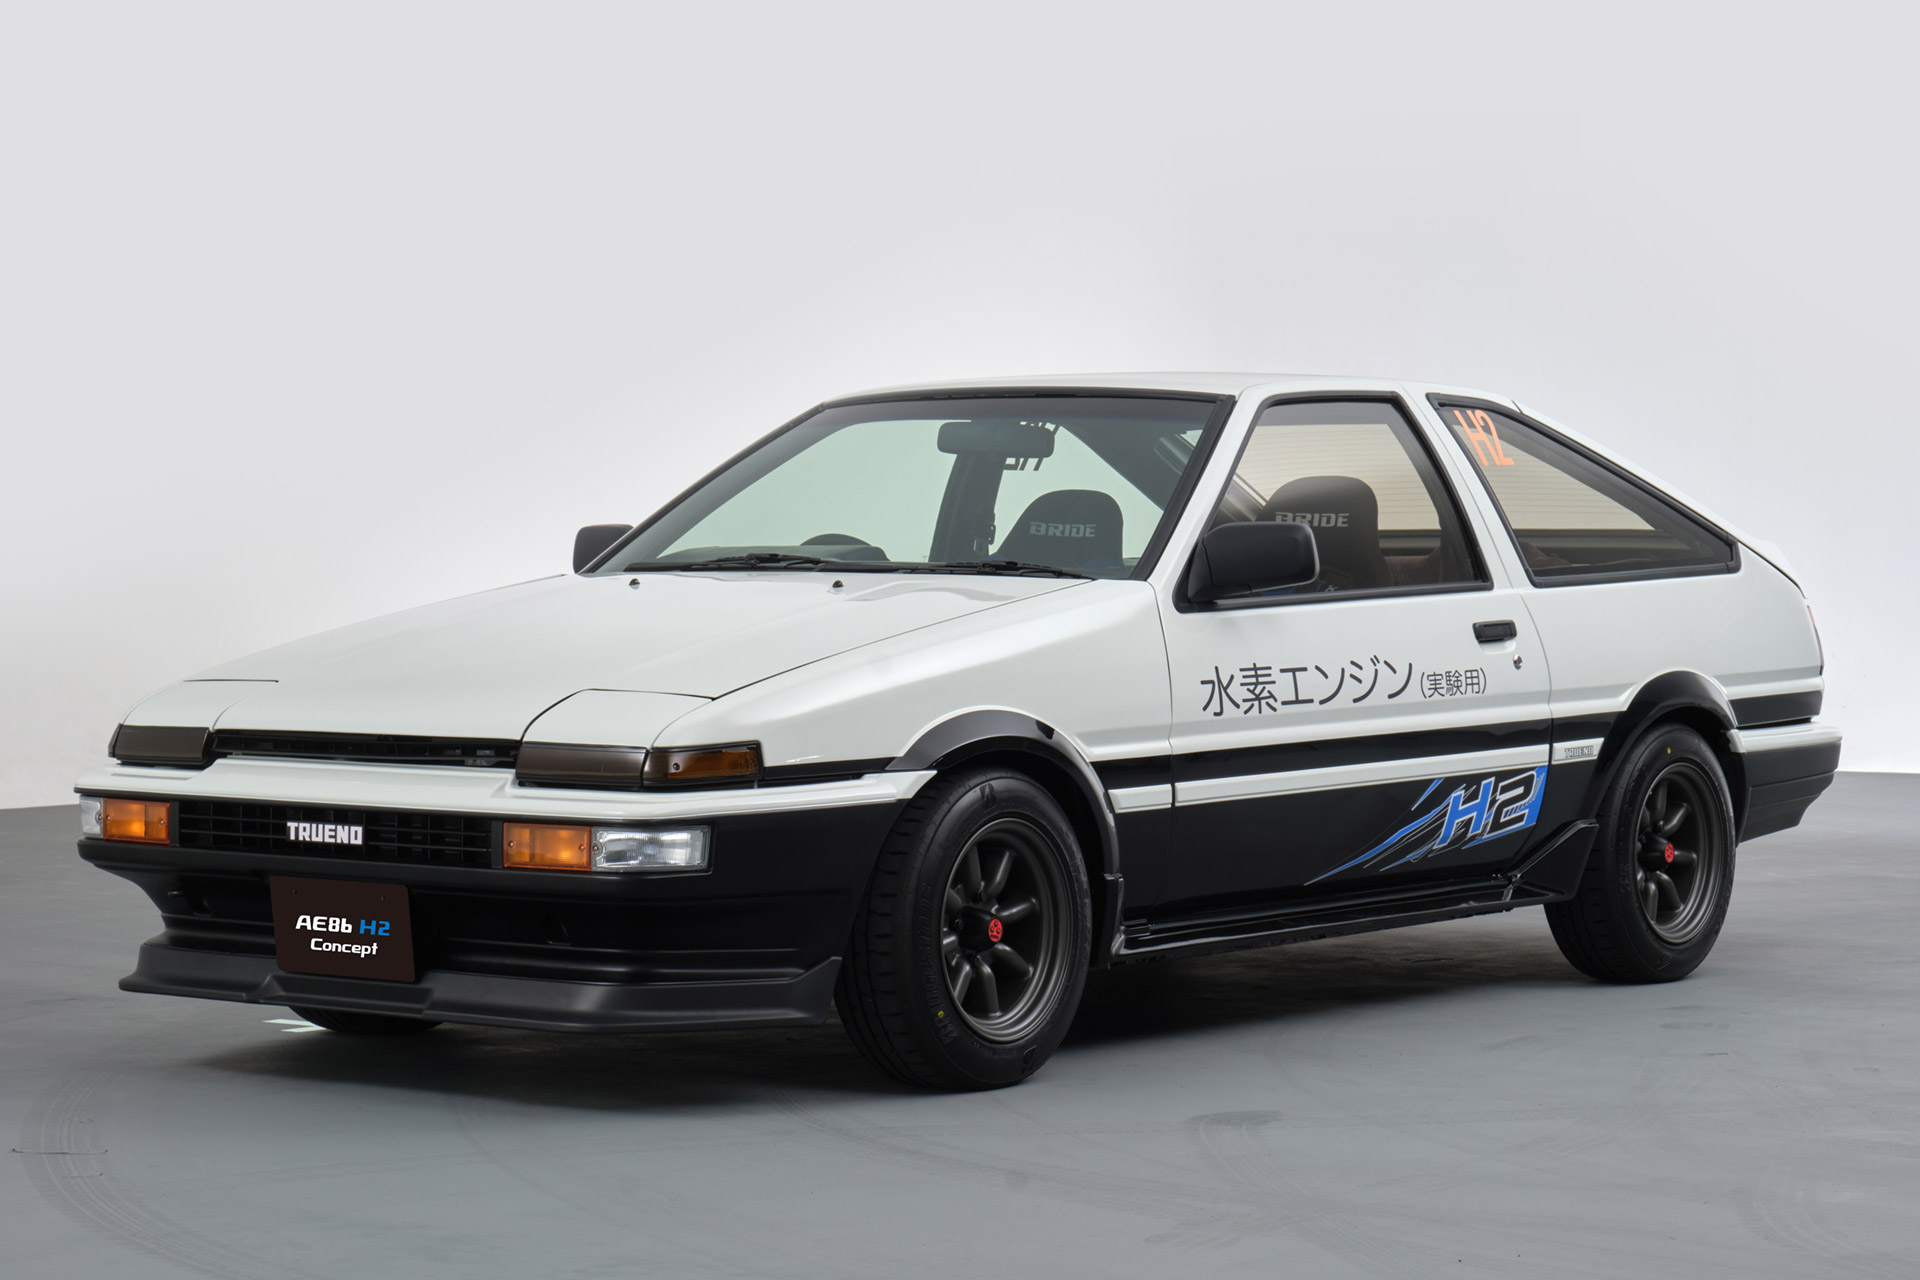 Toyota AE86 Concepts | Uncrate, #Toyota #AE86 #Concepts #Uncrate